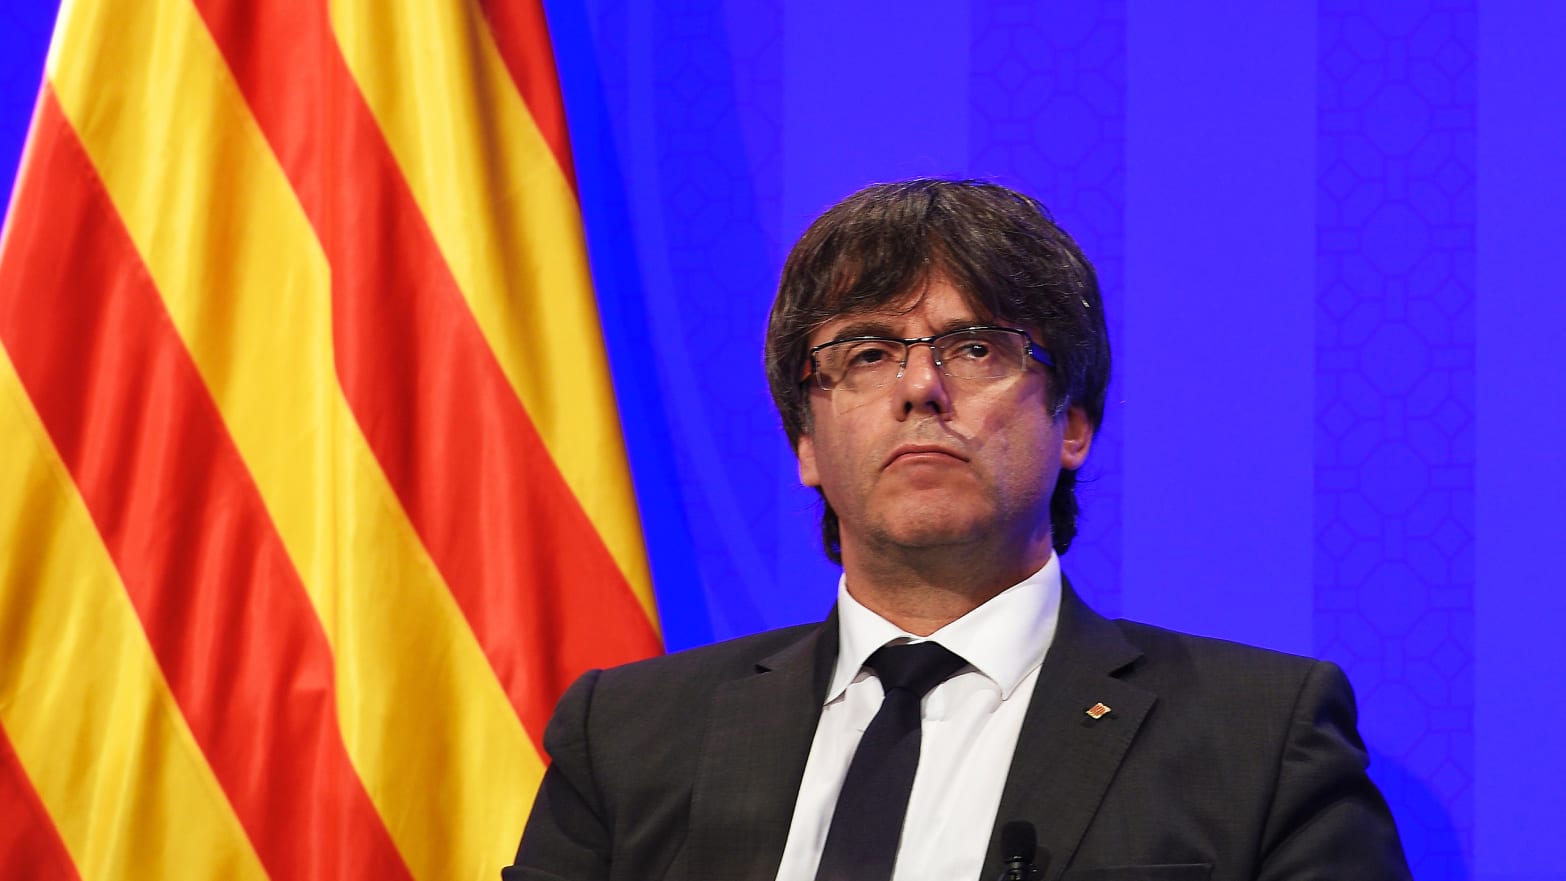 The Catalan President: A Small-Town Boy Who Could Destroy Europe